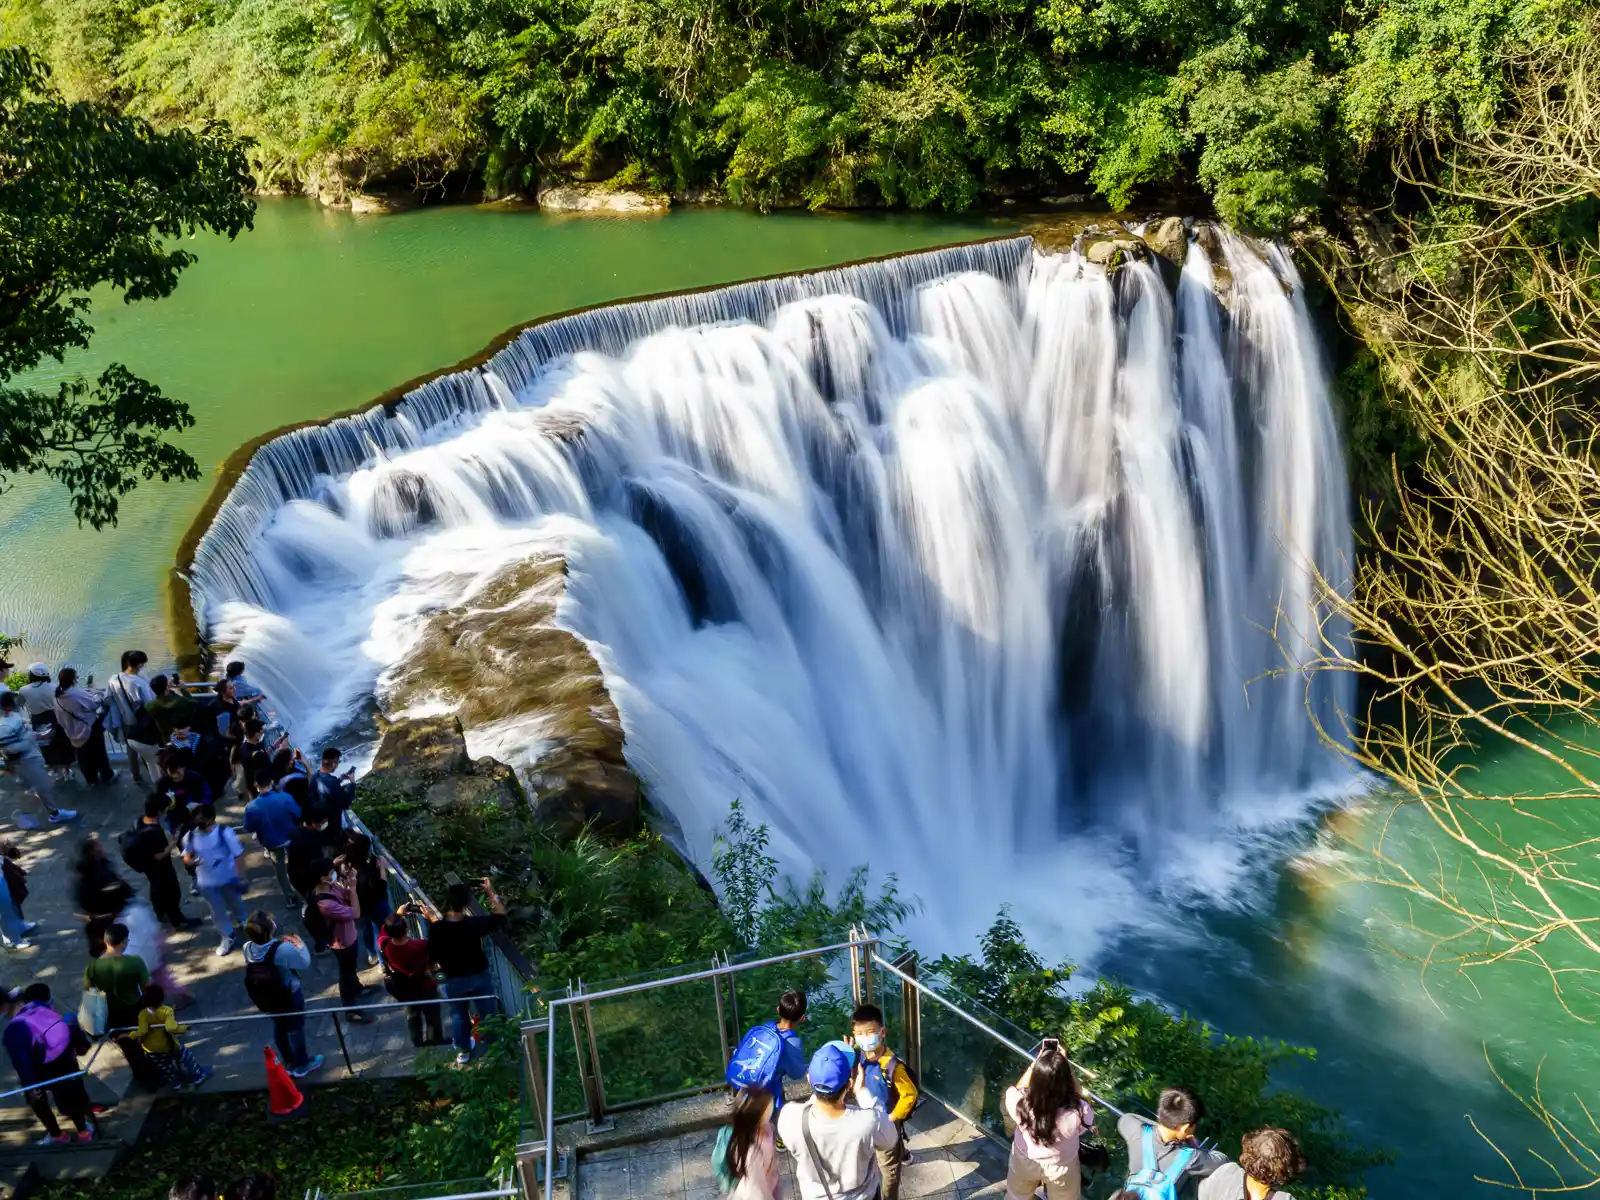 The southern viewing platform of Shifen Waterfall overlooks it from above.